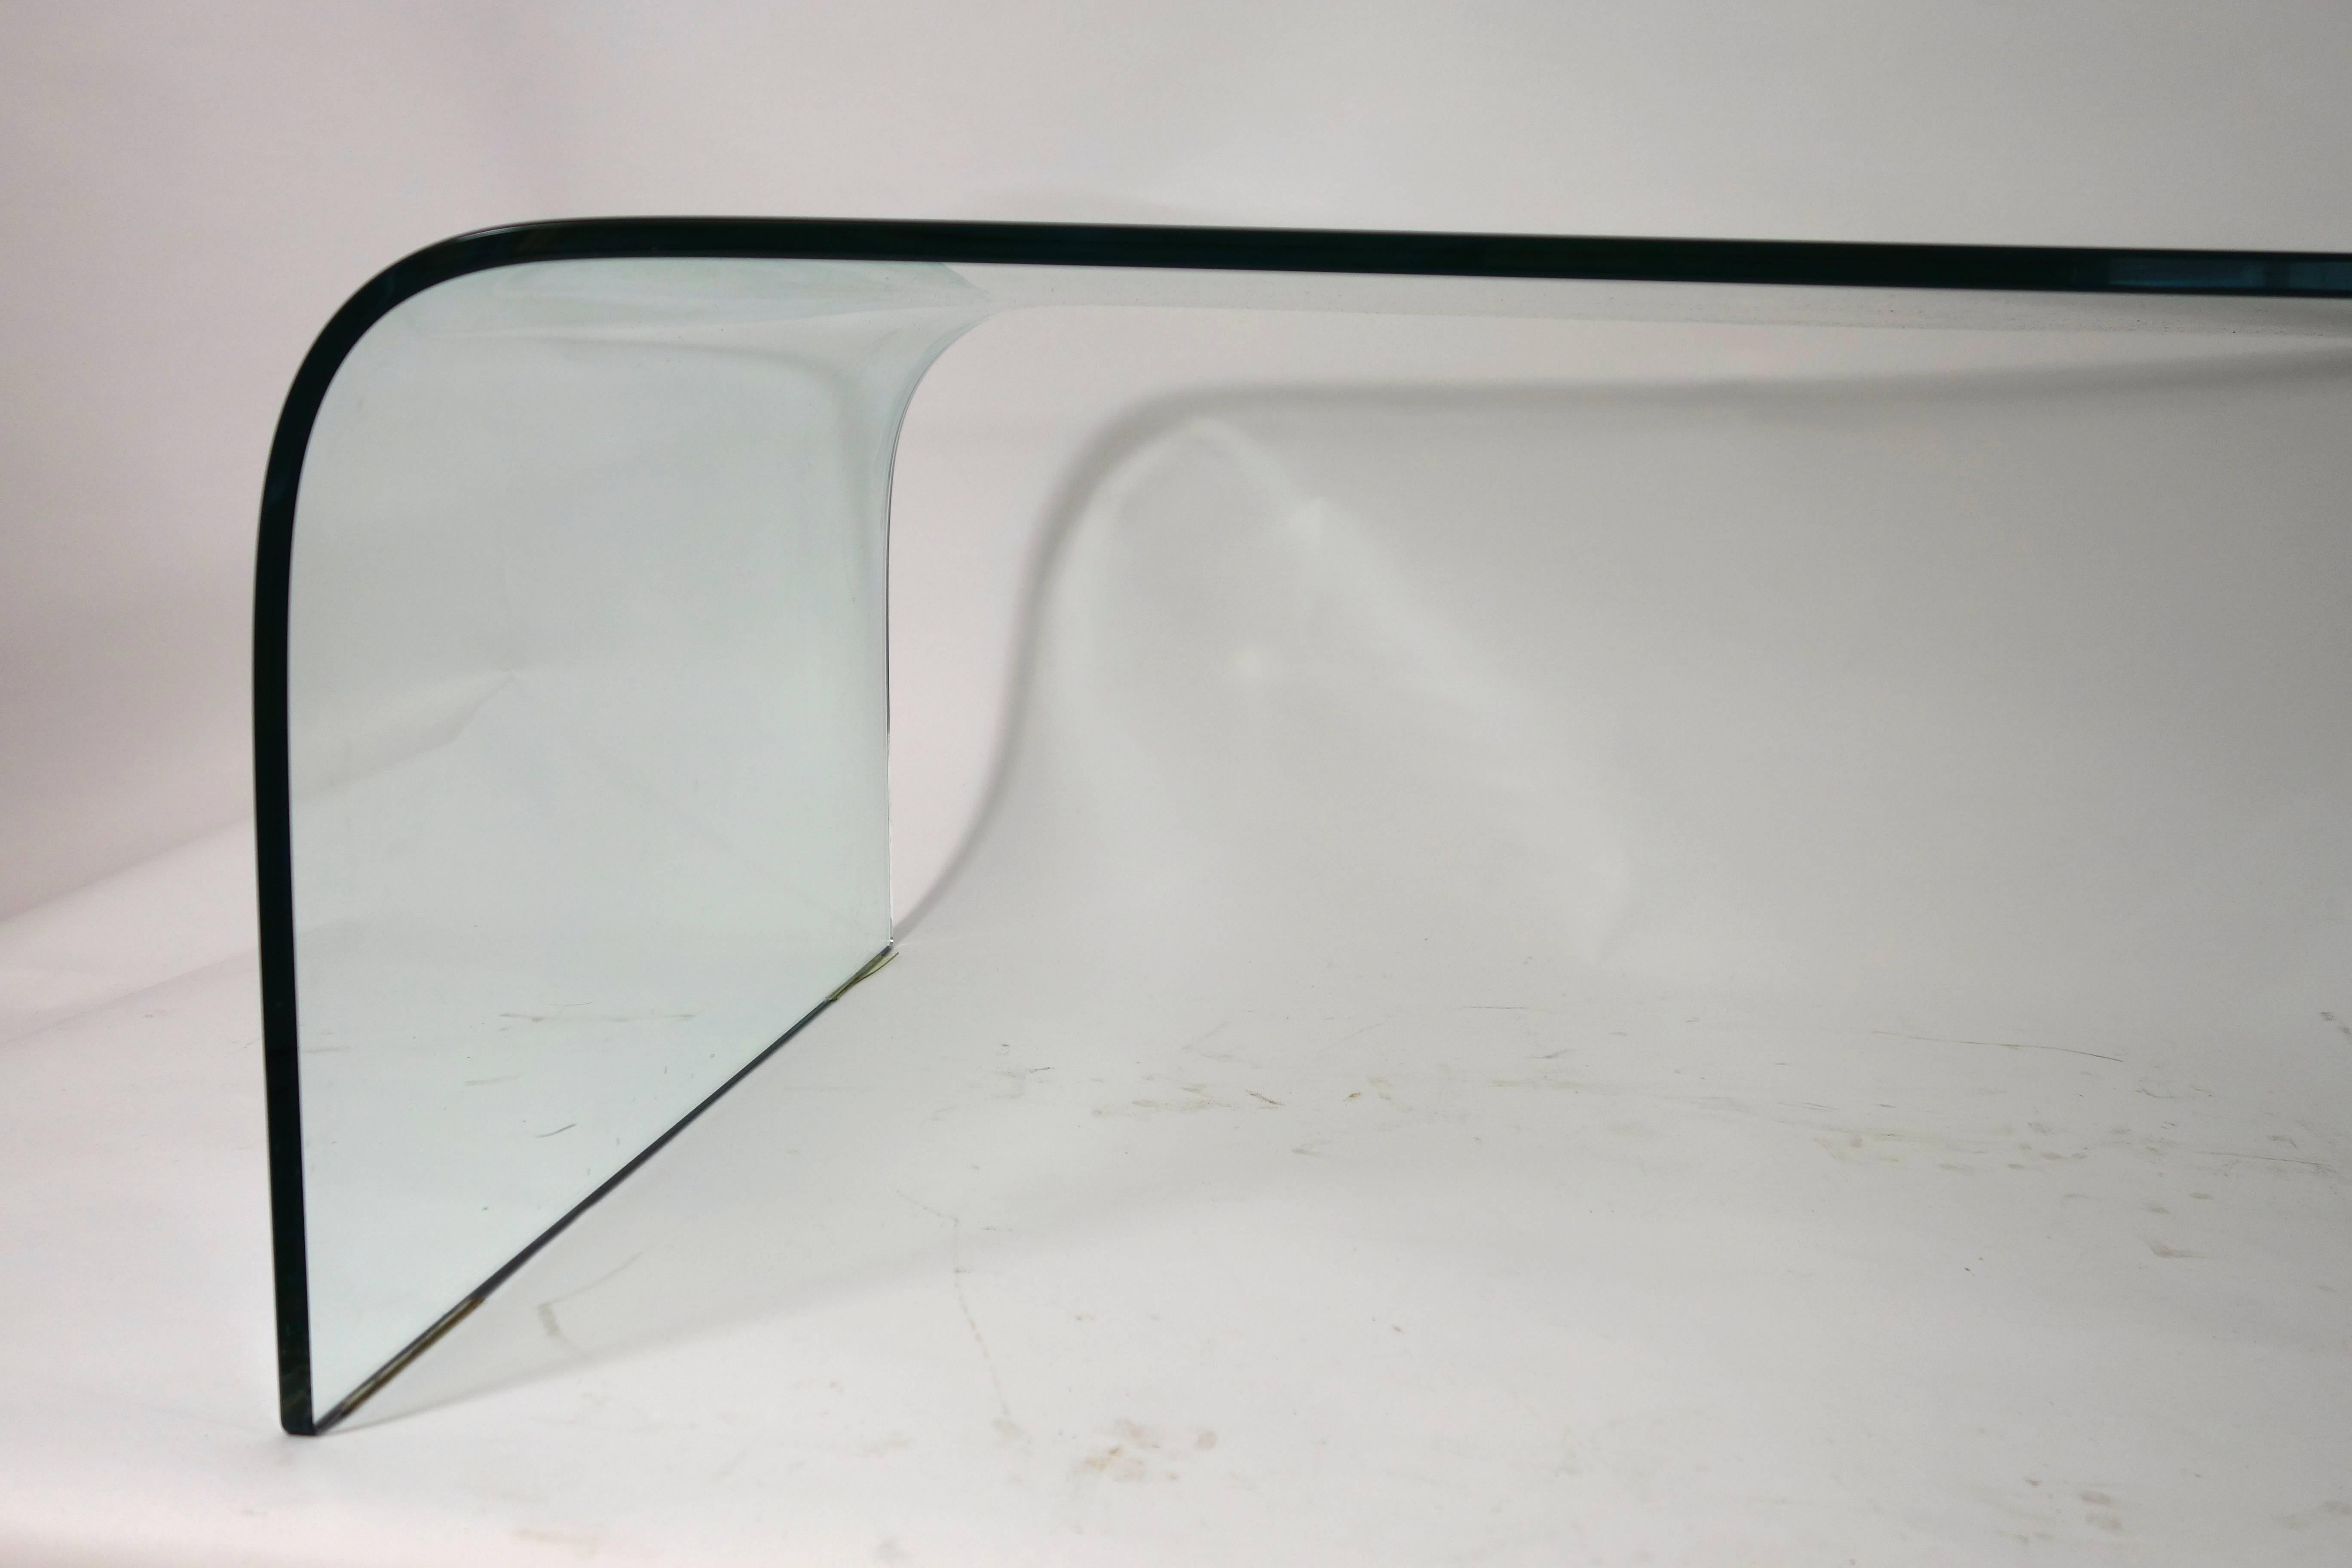 Glass cocktail table designed by Angelo Cortesi for Fiam Italia, named Waterfall. Very elegant yet solid and spacious table made of thick curved glass.